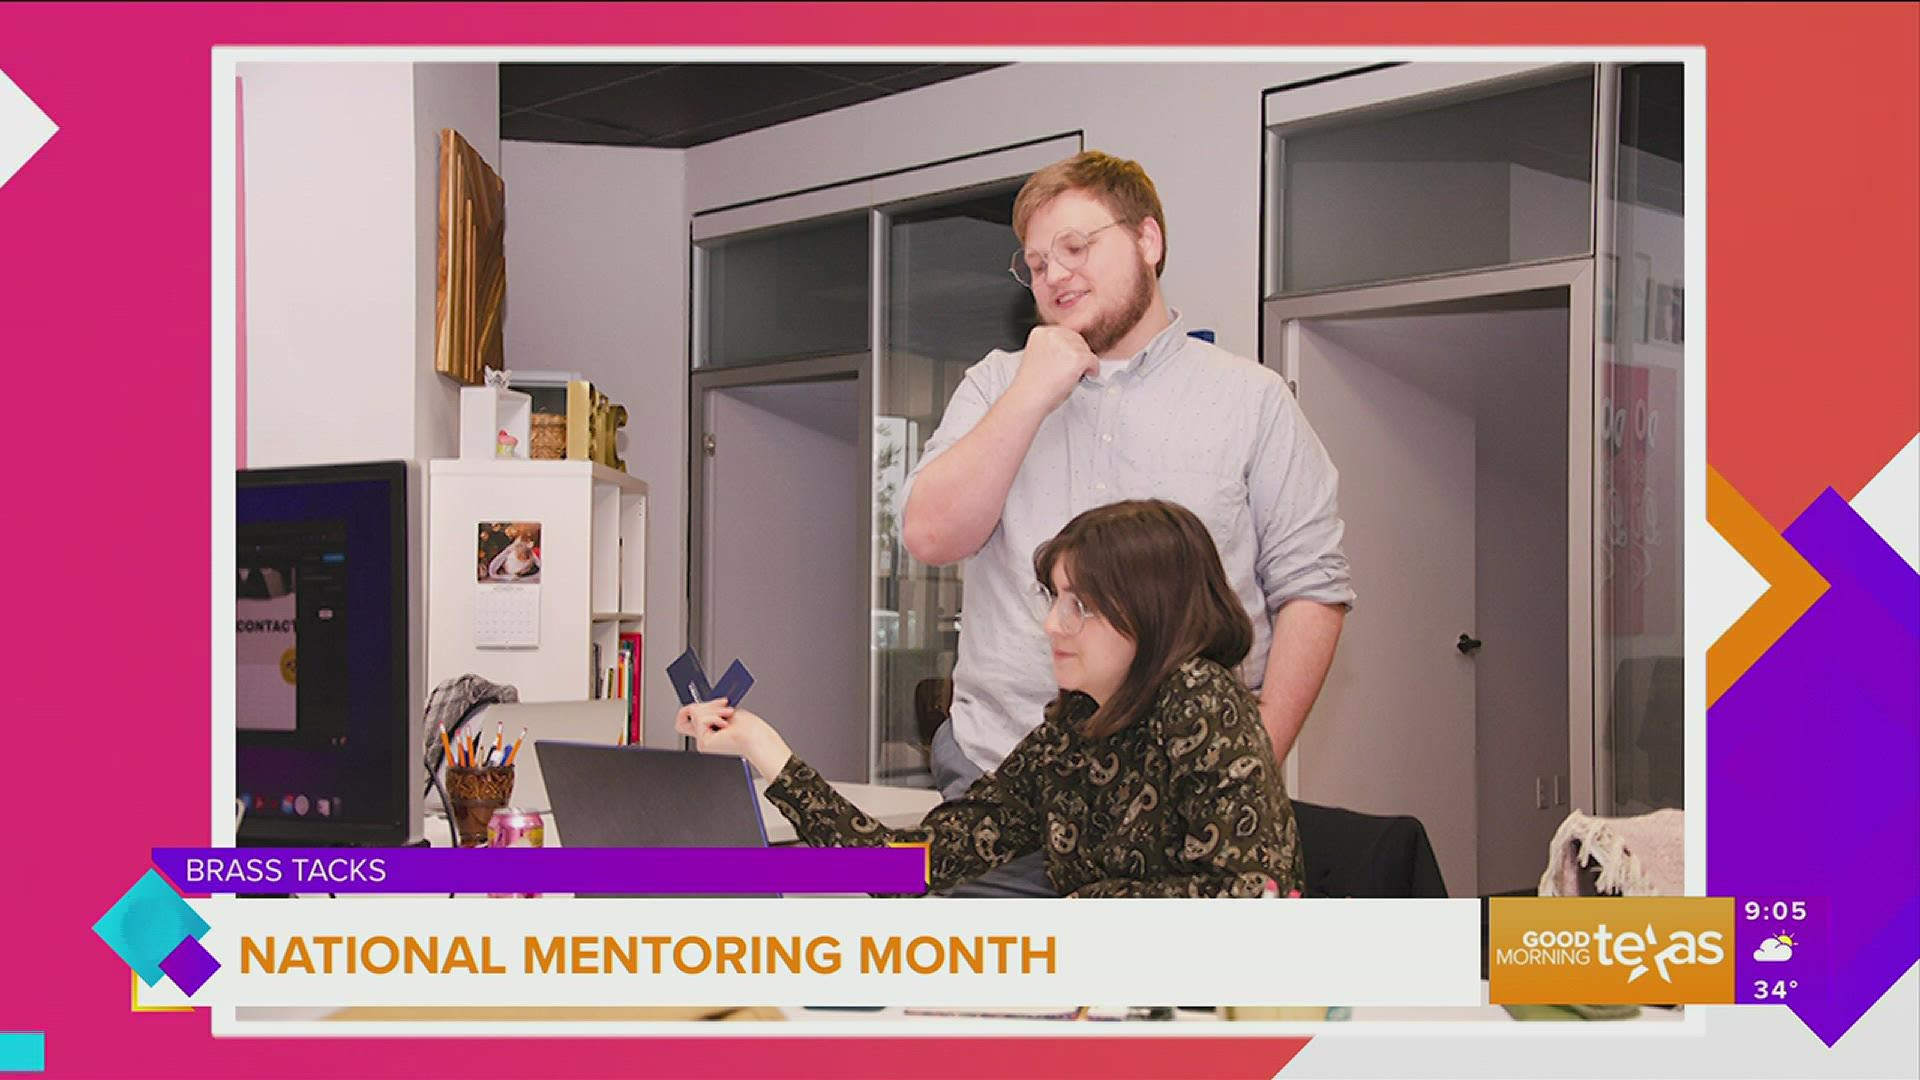 Although National Mentoring Month is coming to an end, it’s never too late to seek one out.